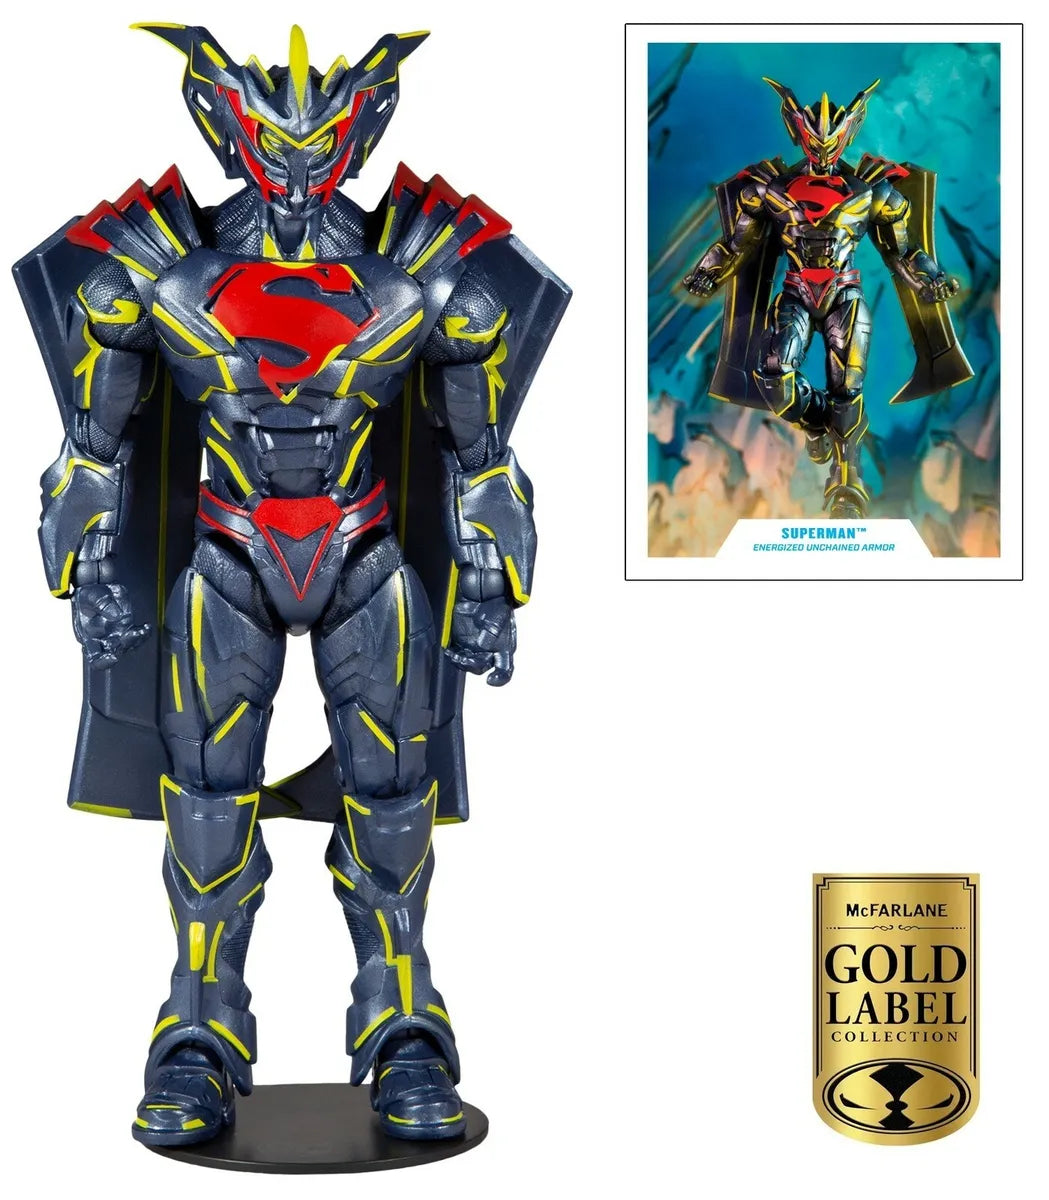 DC Multiverse - Superman (Energized Unchained Armor) - Gold Label